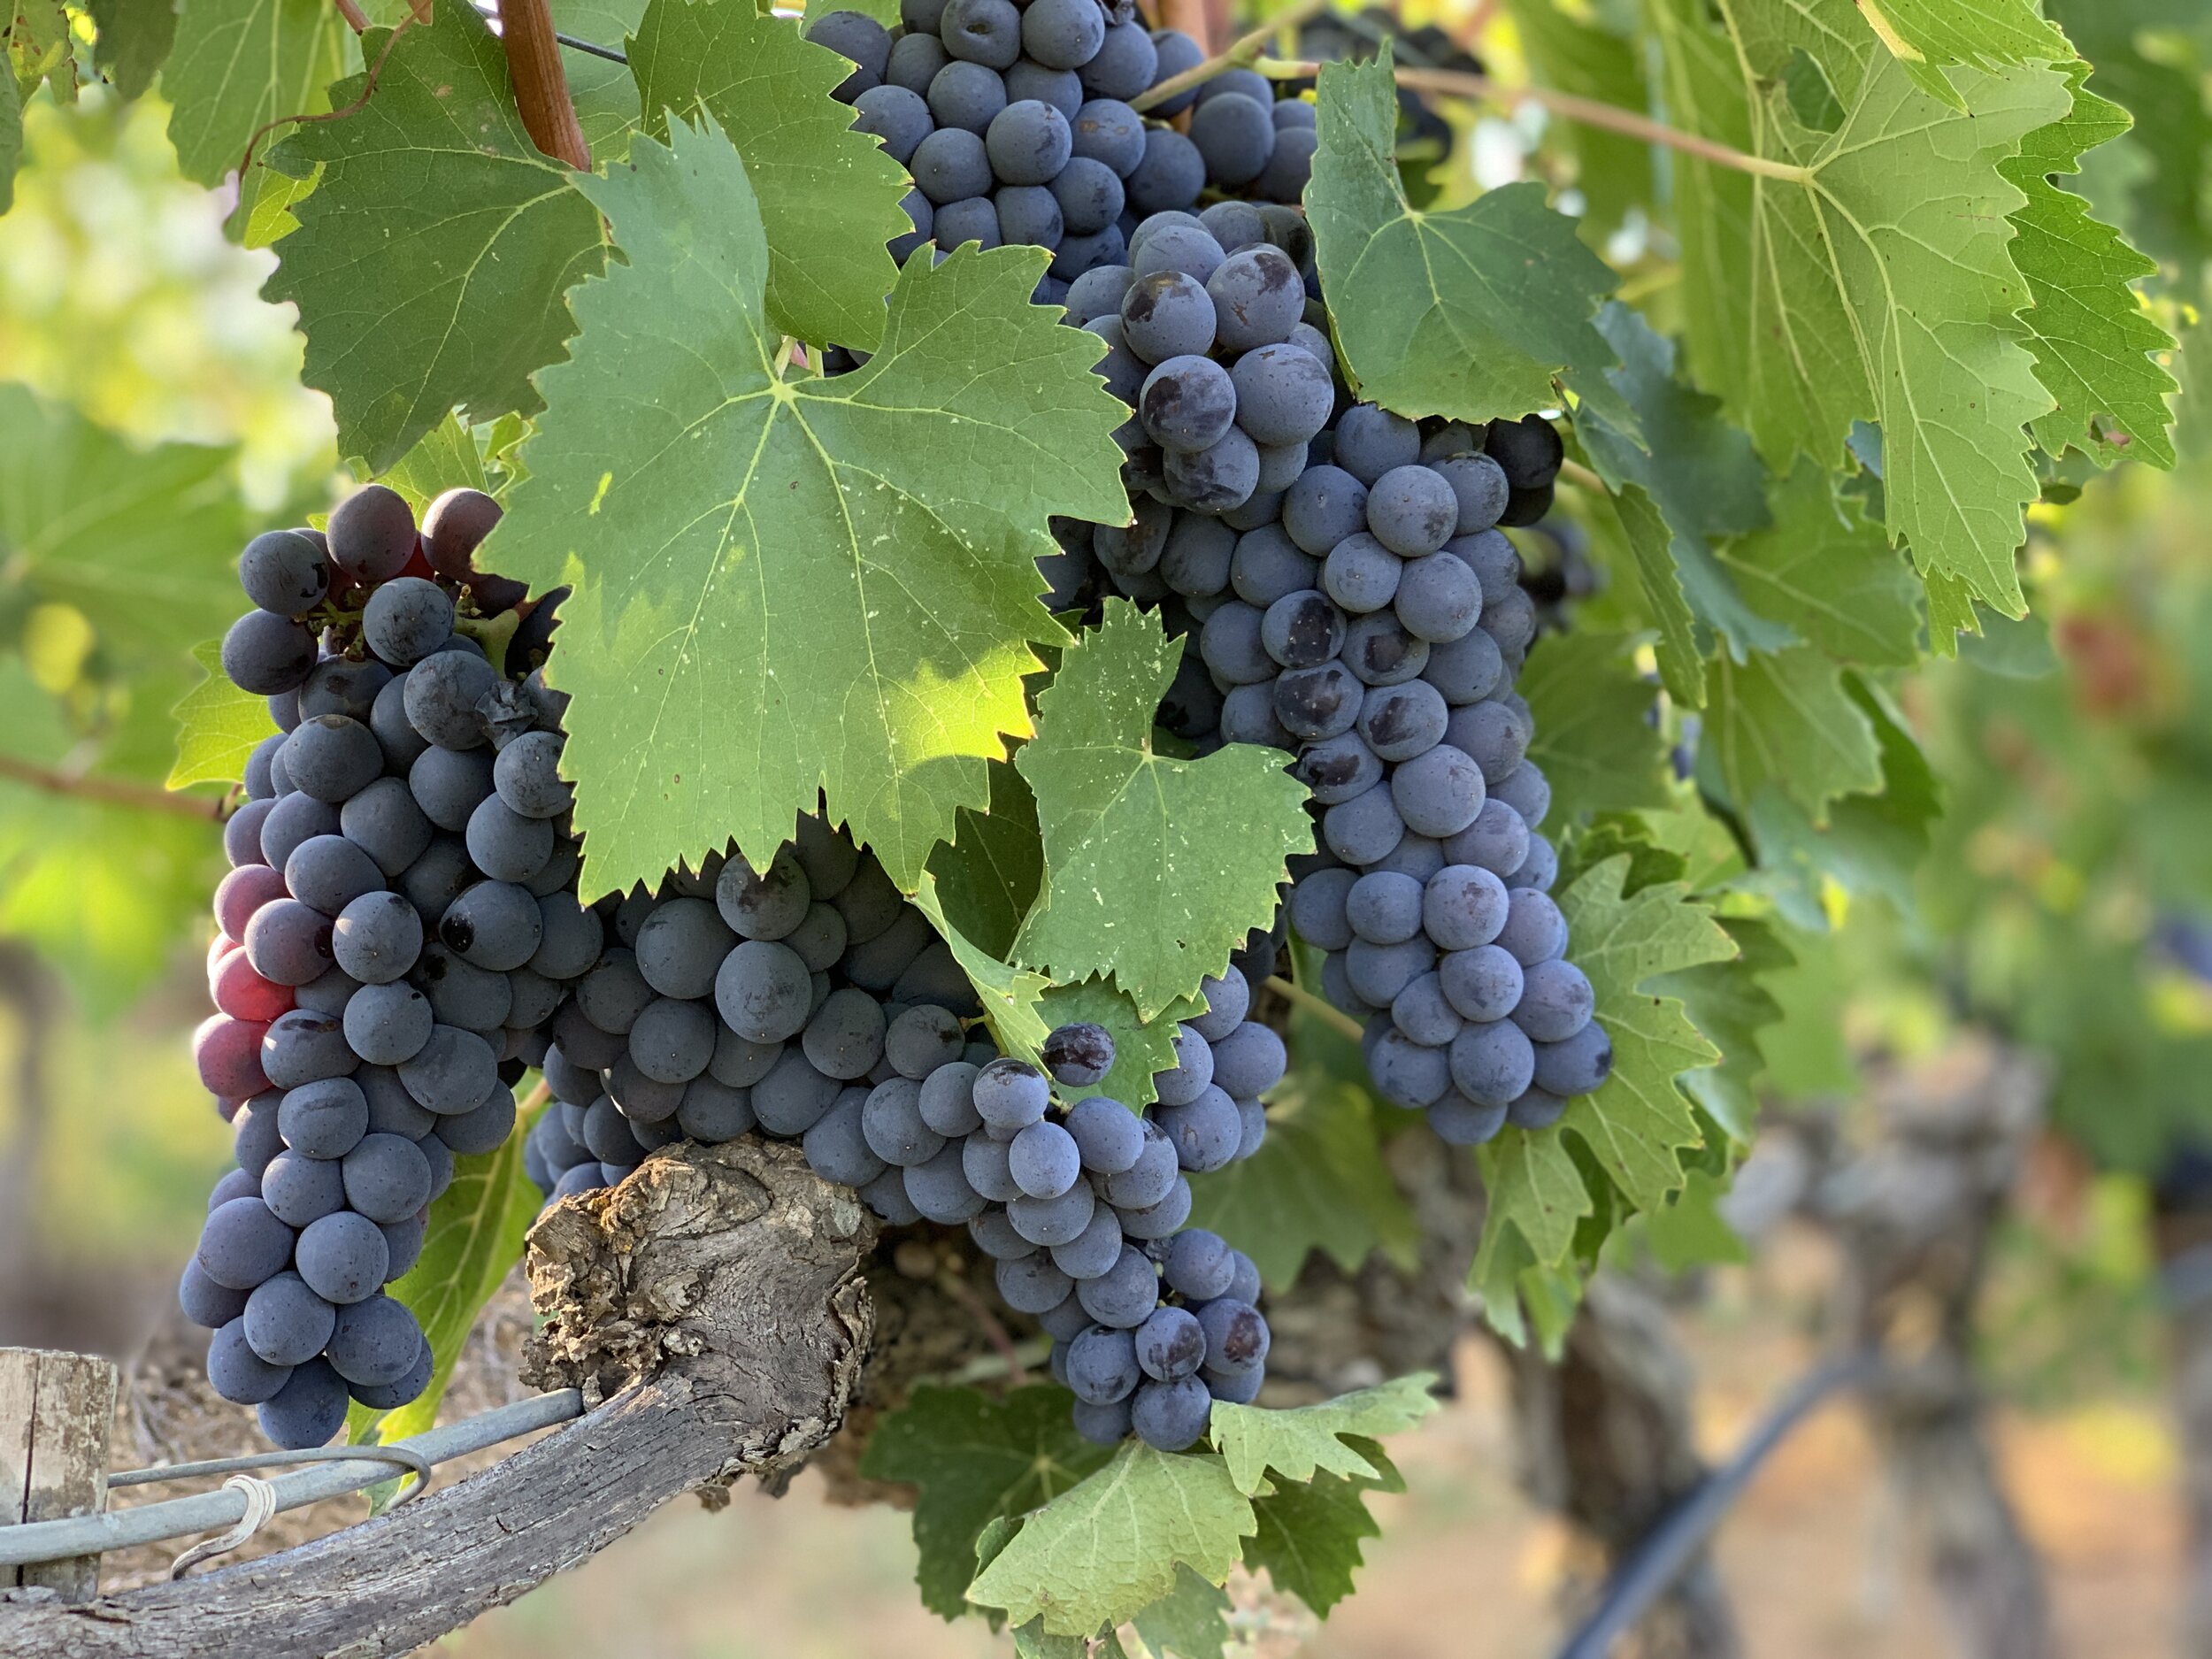 Resveratrol is present in stressed parts of the red grape plant, but despite common theories, negligible amounts reach red wine.